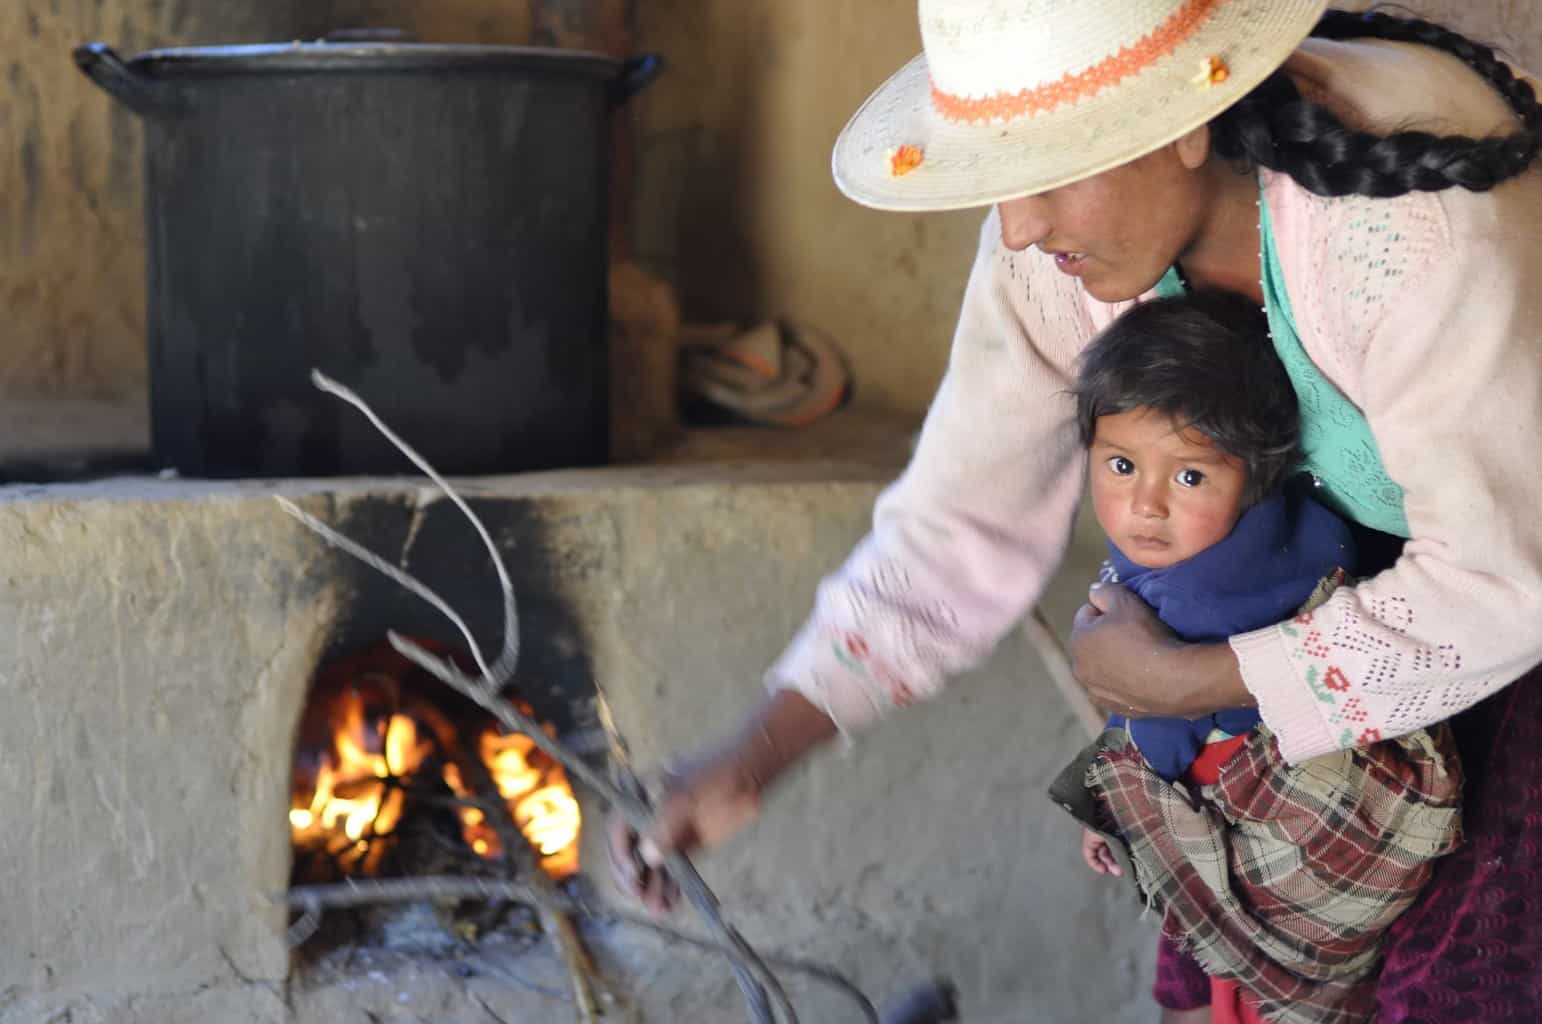 a Bolivian mother holding her baby as she stokes a wood burning stove